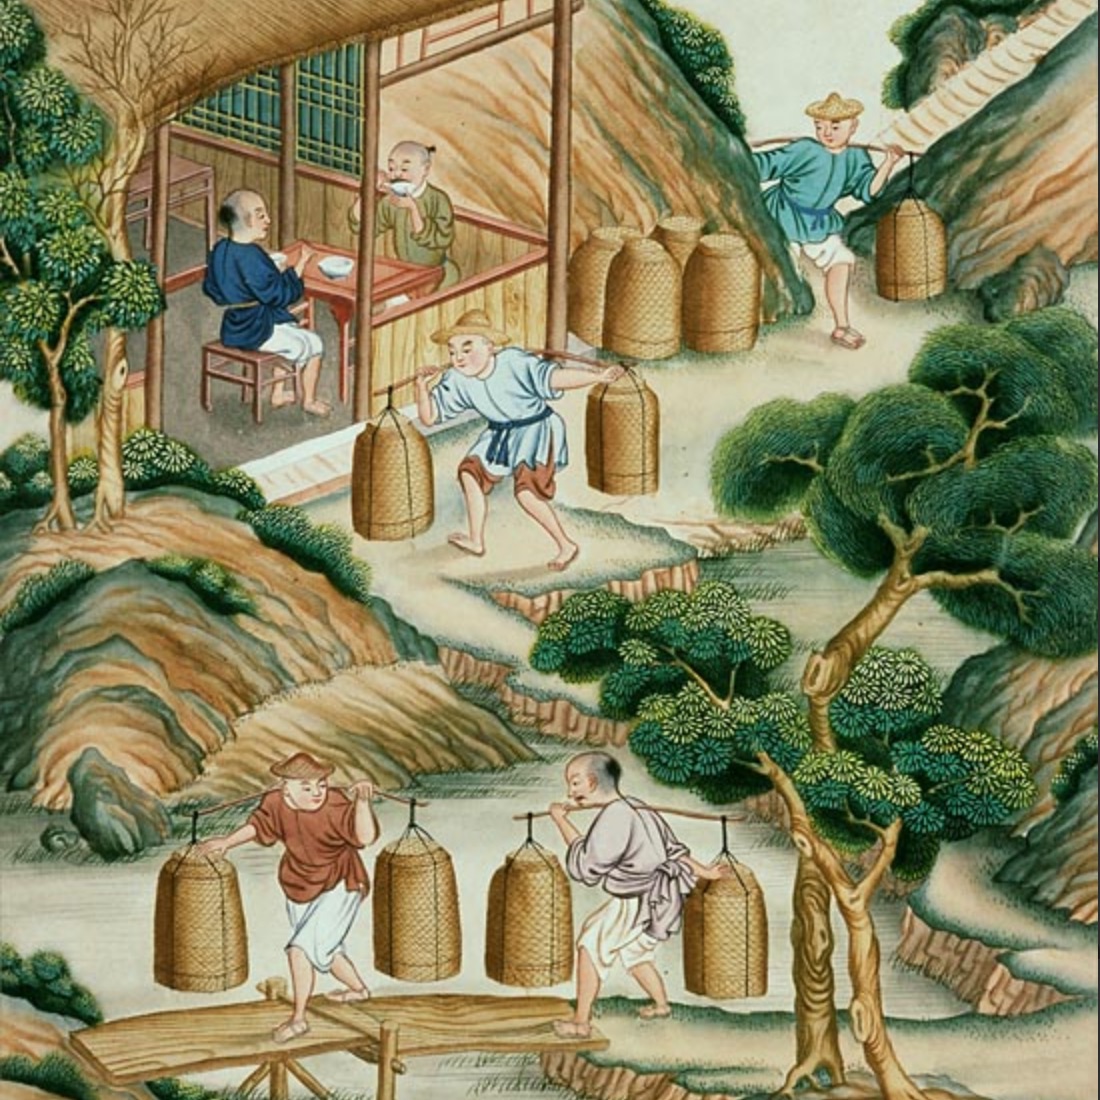 Chinese workers carry tea in this watercolor from a 1790 album on Tea Production.